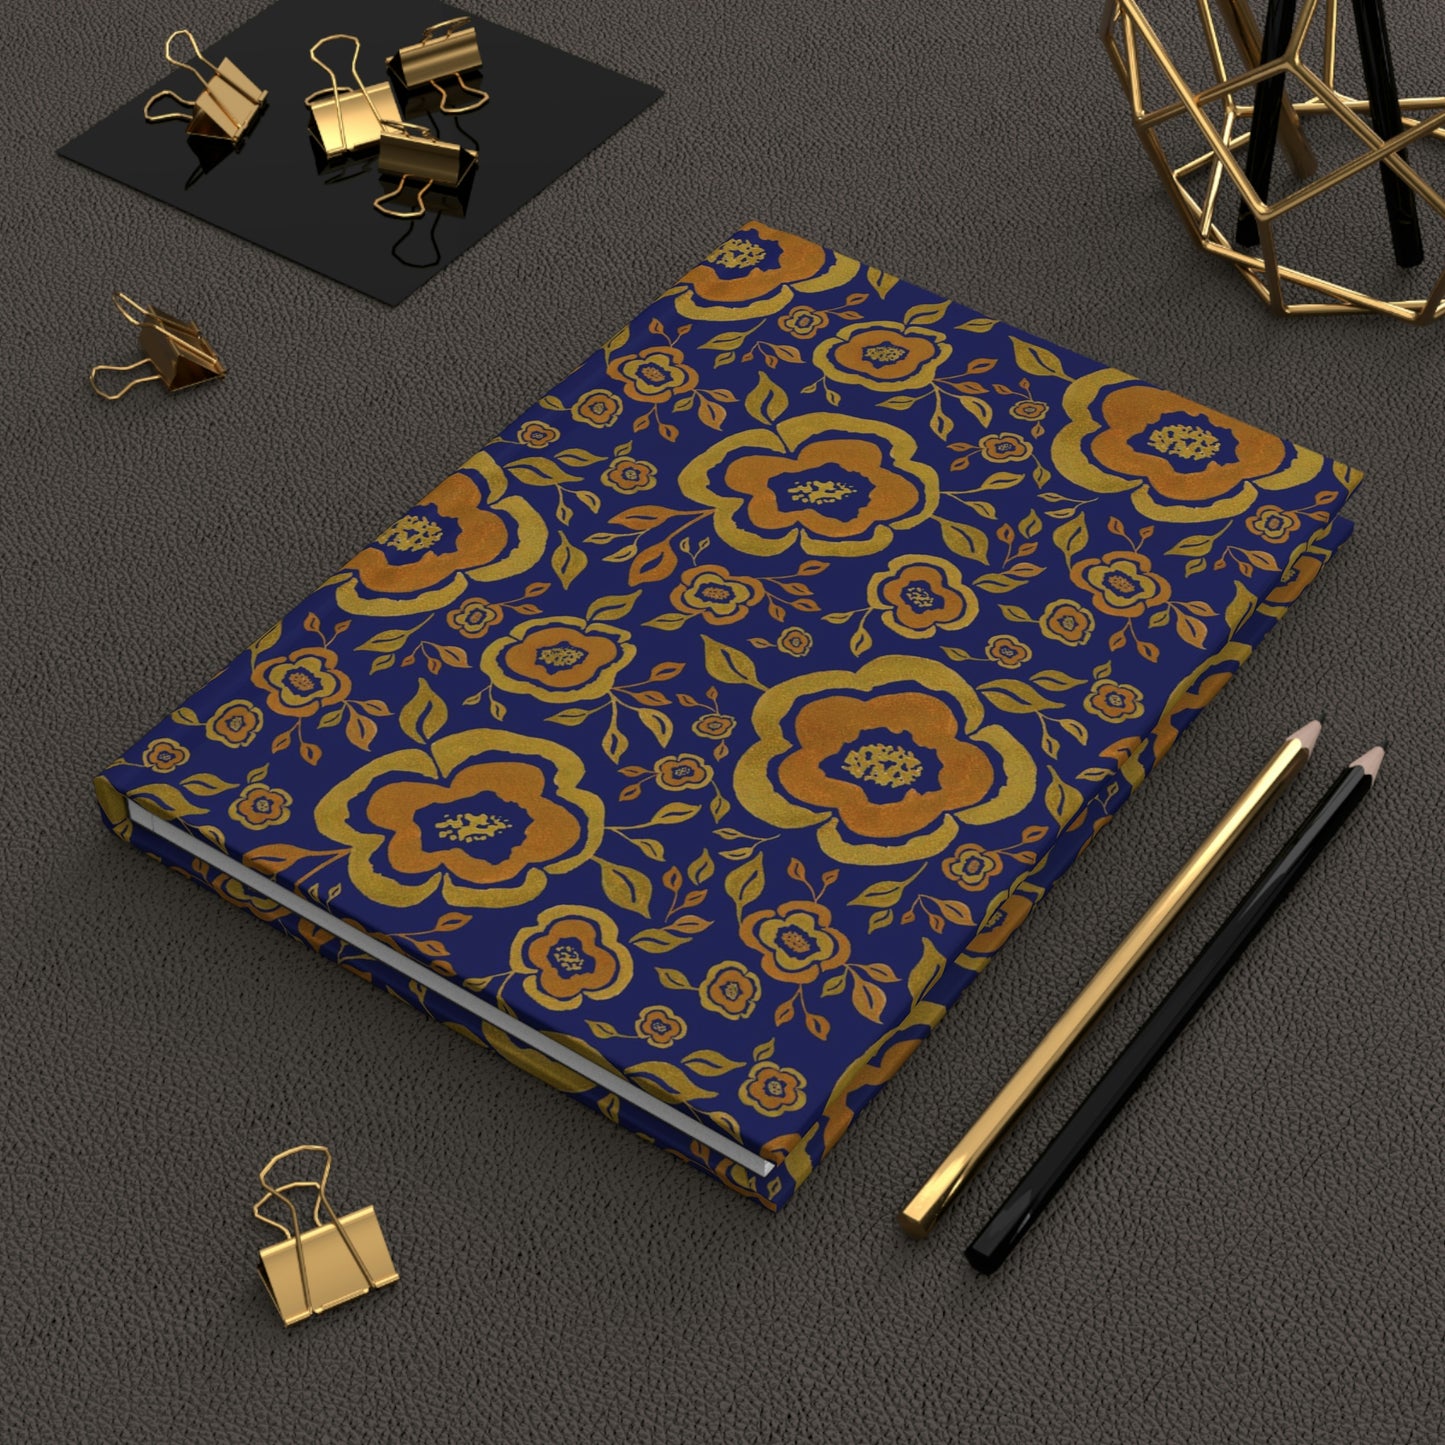 Yoga Journal - Blue with Gold Flowers Hardcover Journal Matte